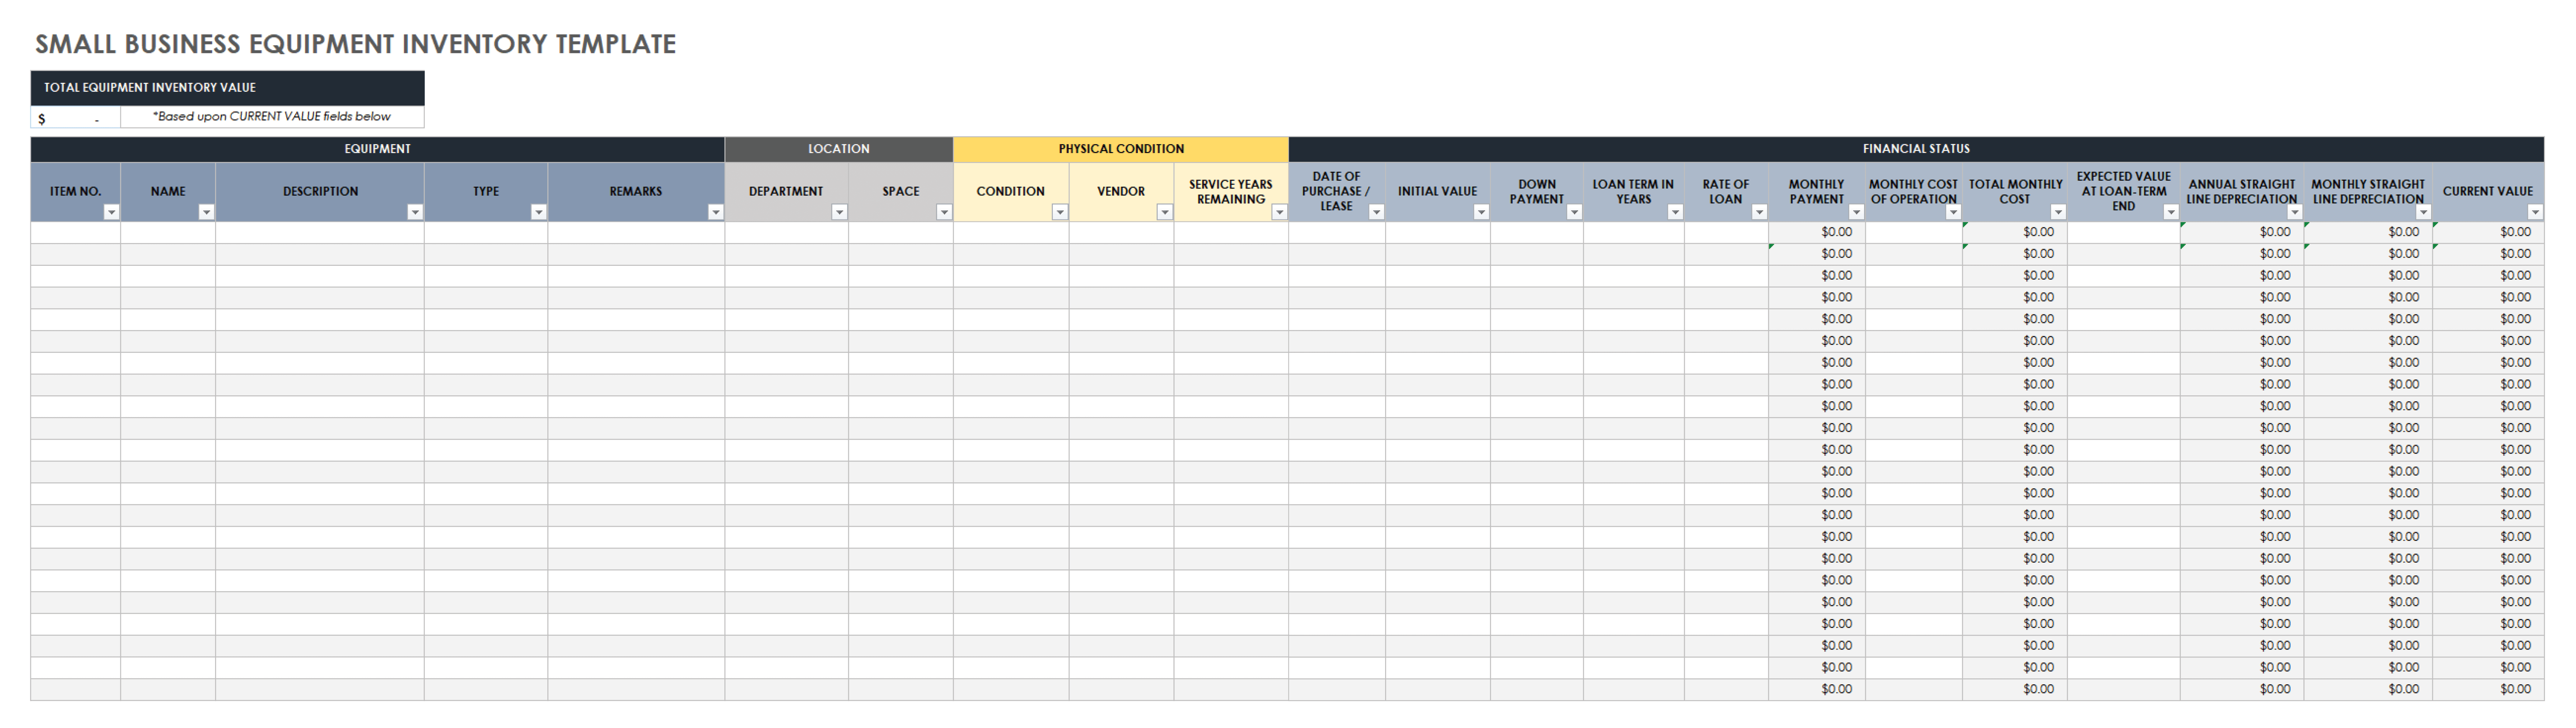 Small Business Equipment Inventory Template